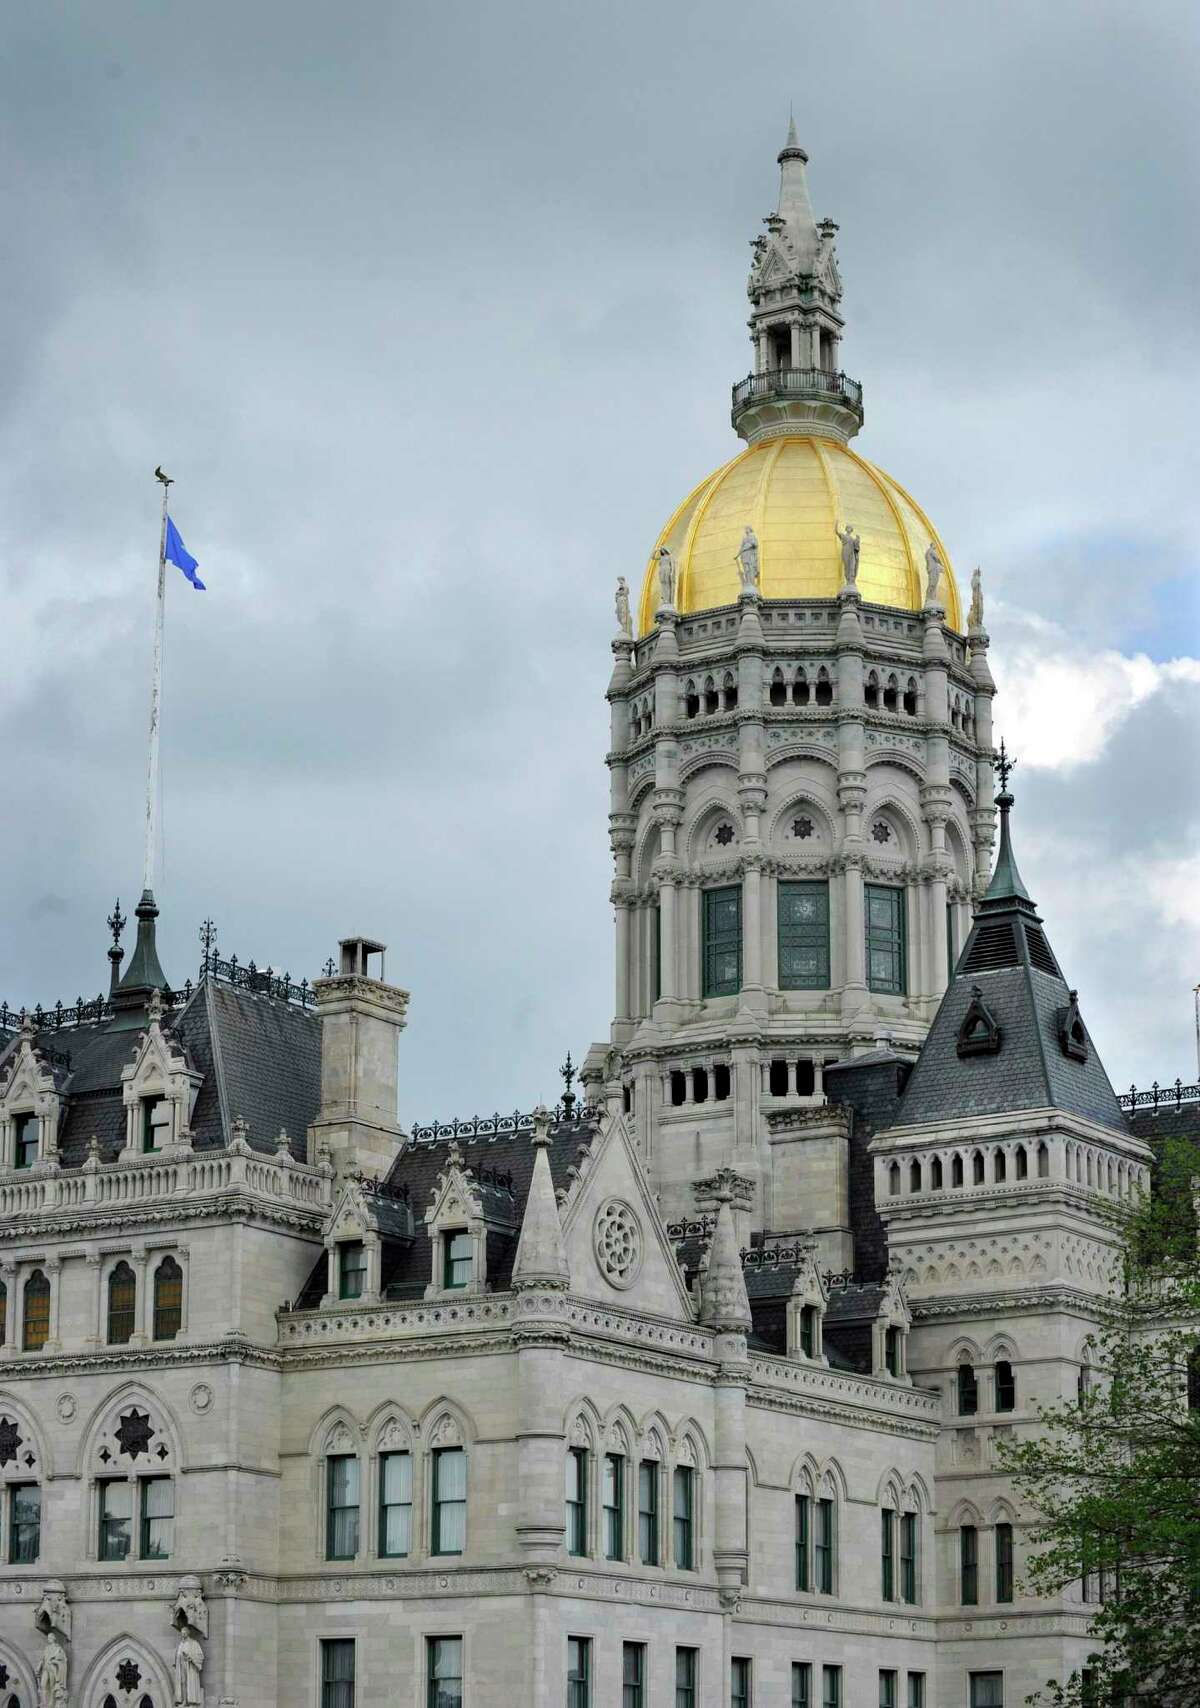 Gov. Ned Lamont wants to pay for interior improvements to his second-floor office suite in the historic State Capitol building, which was first opened in 1878.